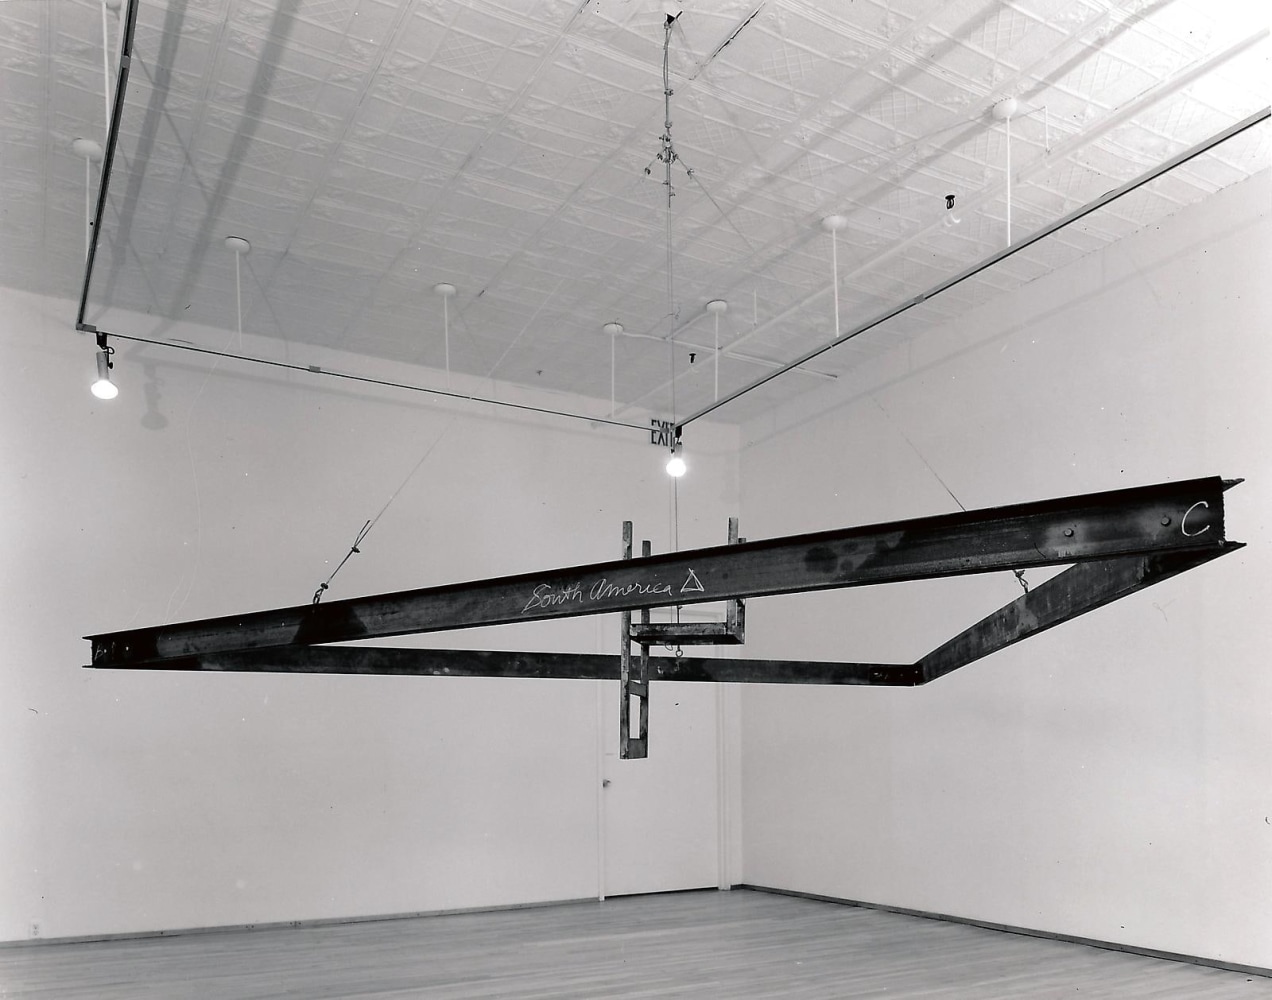 Bruce Nauman
South America Triangle, 1981
steel and cast iron
168 inches (426,7 cm)
SW 82009
Collection of Hirshhorn Museum and Sculpture Garden, Smithsonian Institution, Washington, D.C.